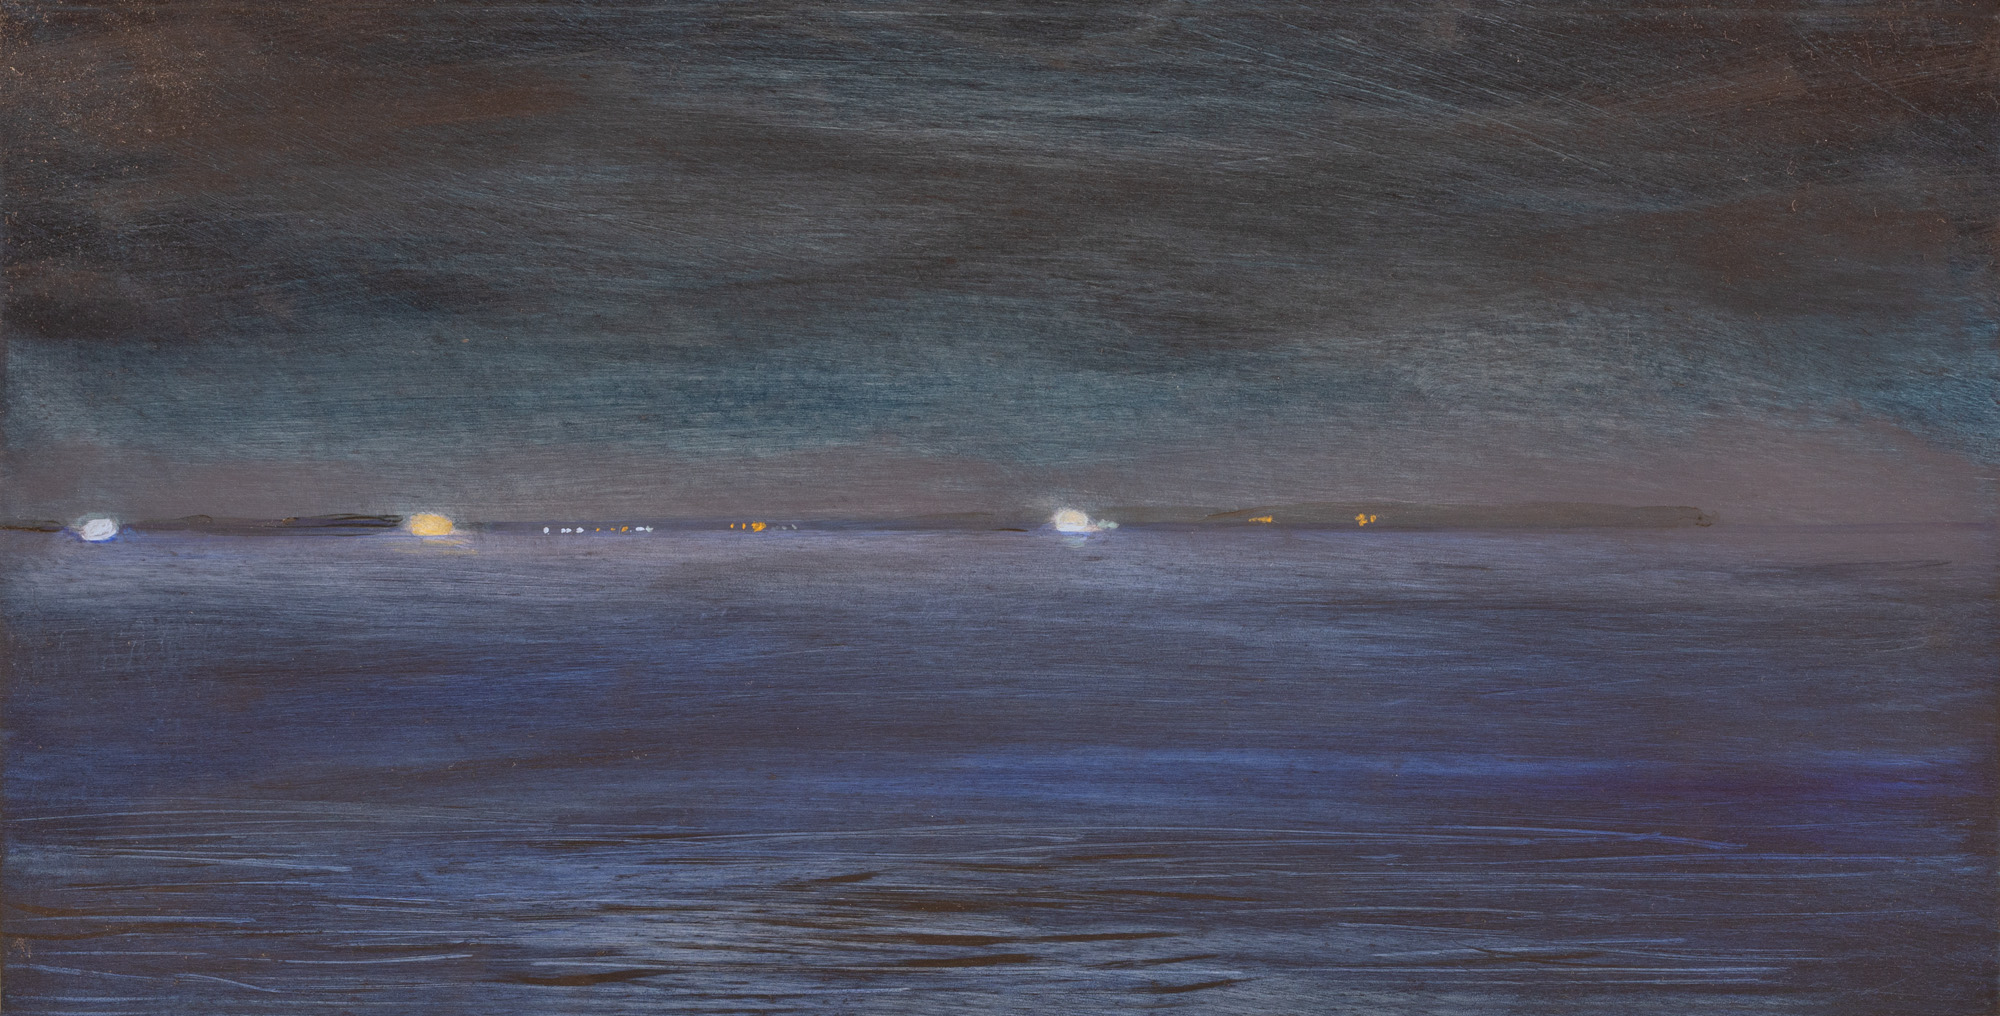 View from the Ferry - Night Crossing, oil on panel, 6 x 12 in., $350.00